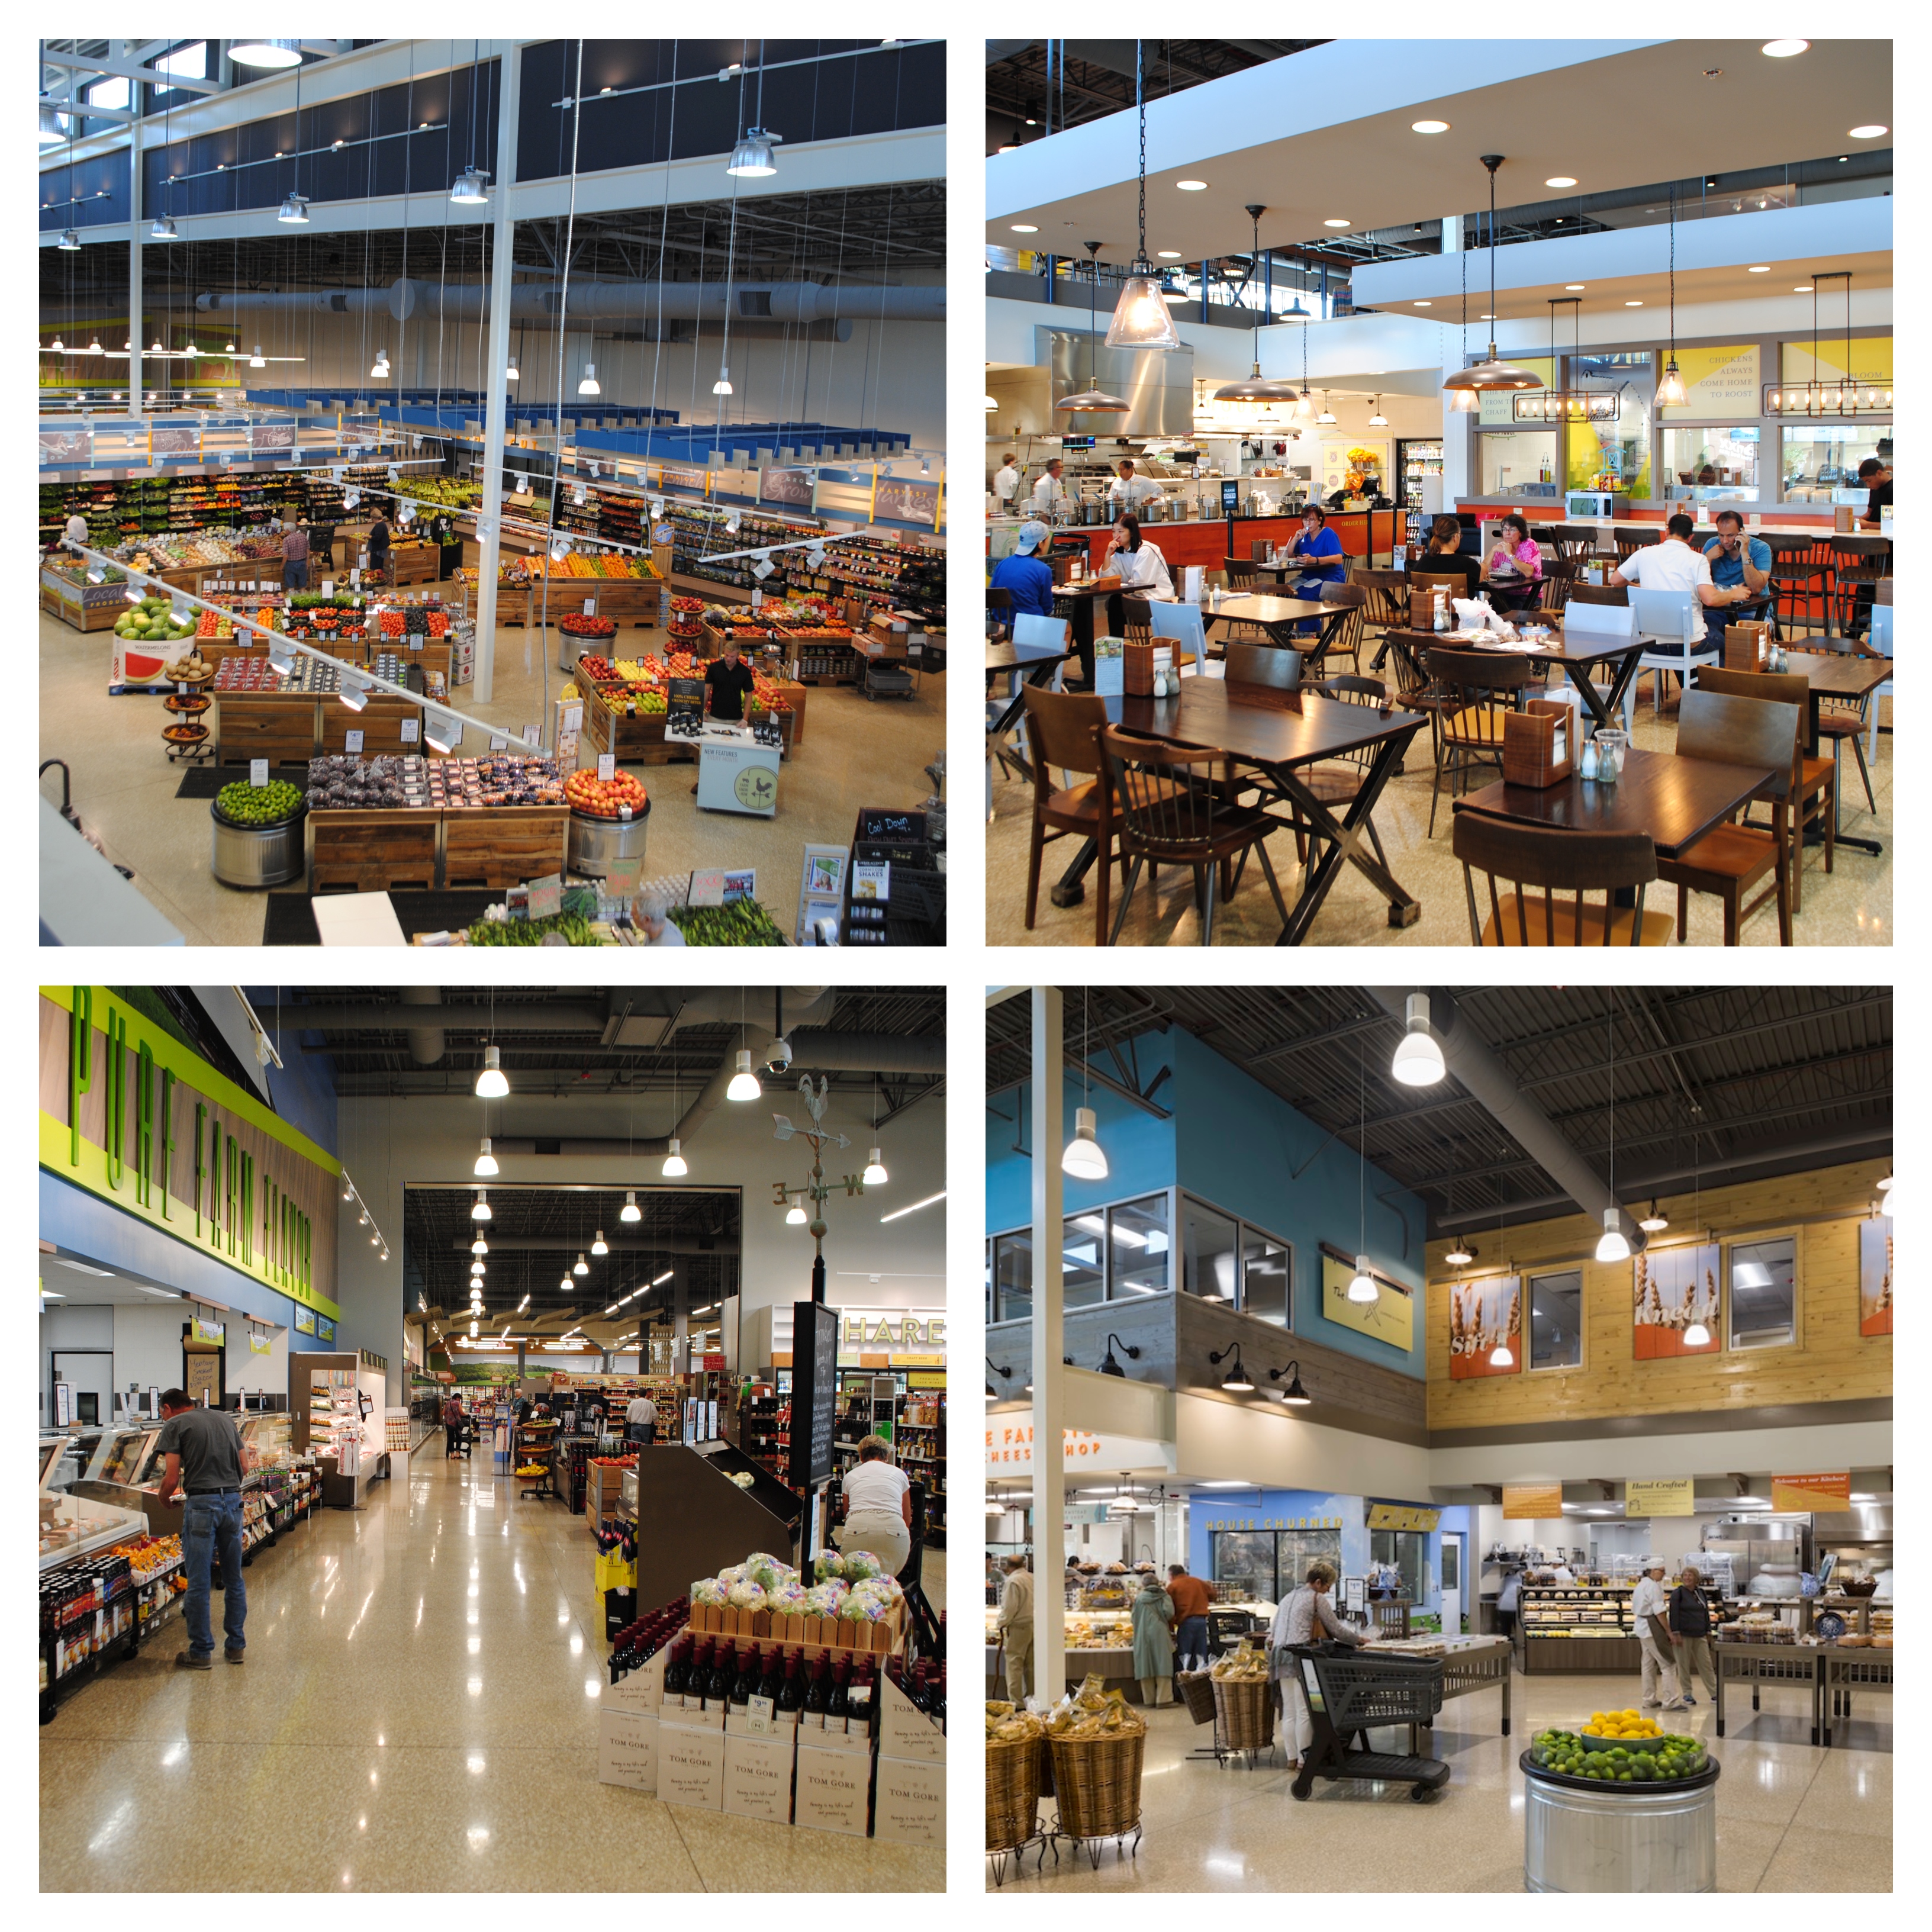 Scenes inside Champaign, Illinois' Harvest Market, a grocery store designed by Shook Kelley